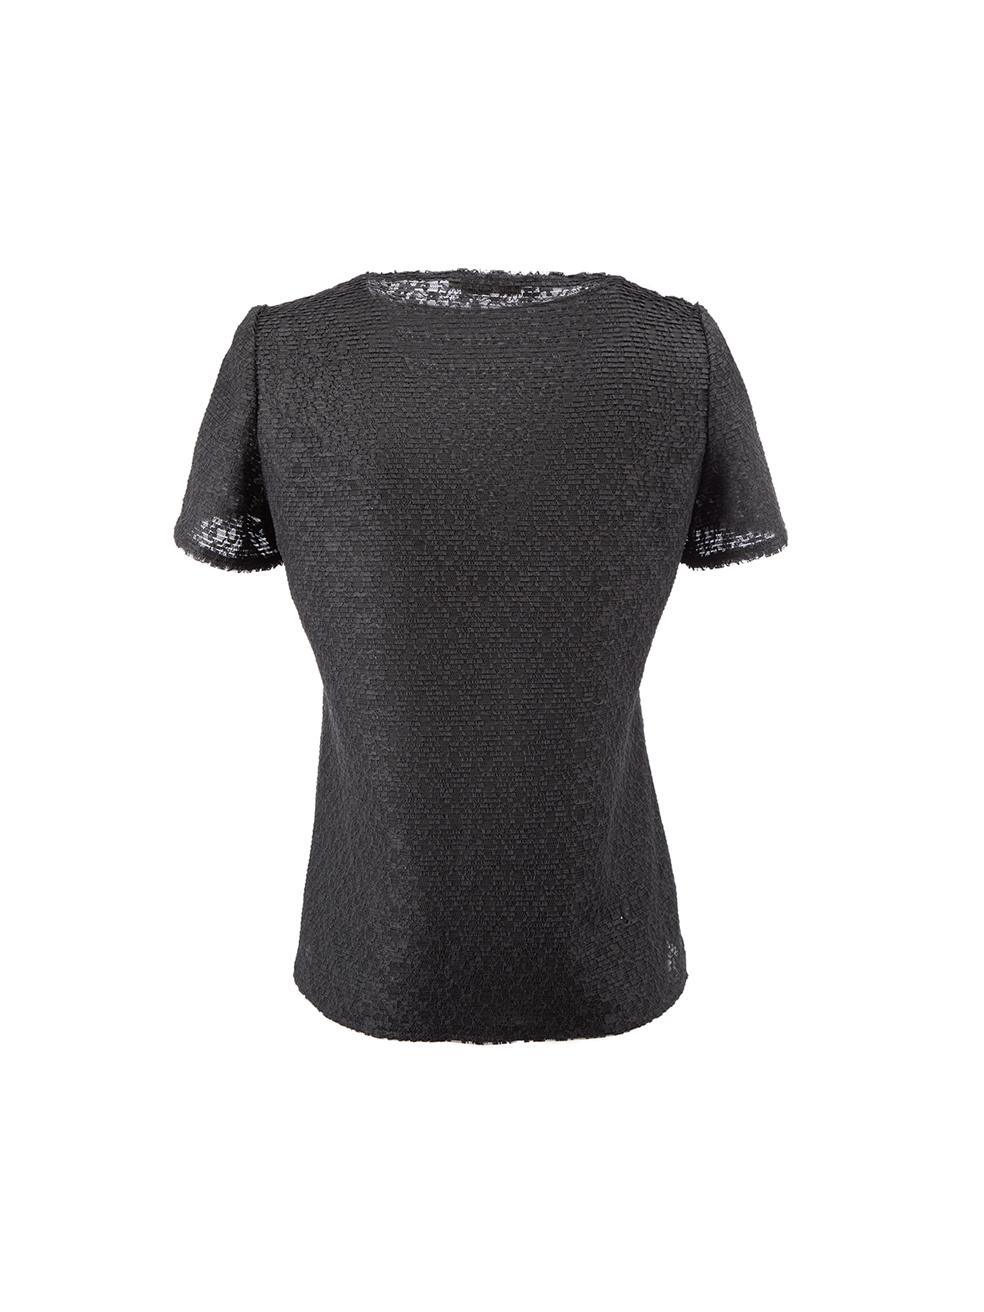 Black Lace Square Neck T-Shirt Size L In Good Condition For Sale In London, GB